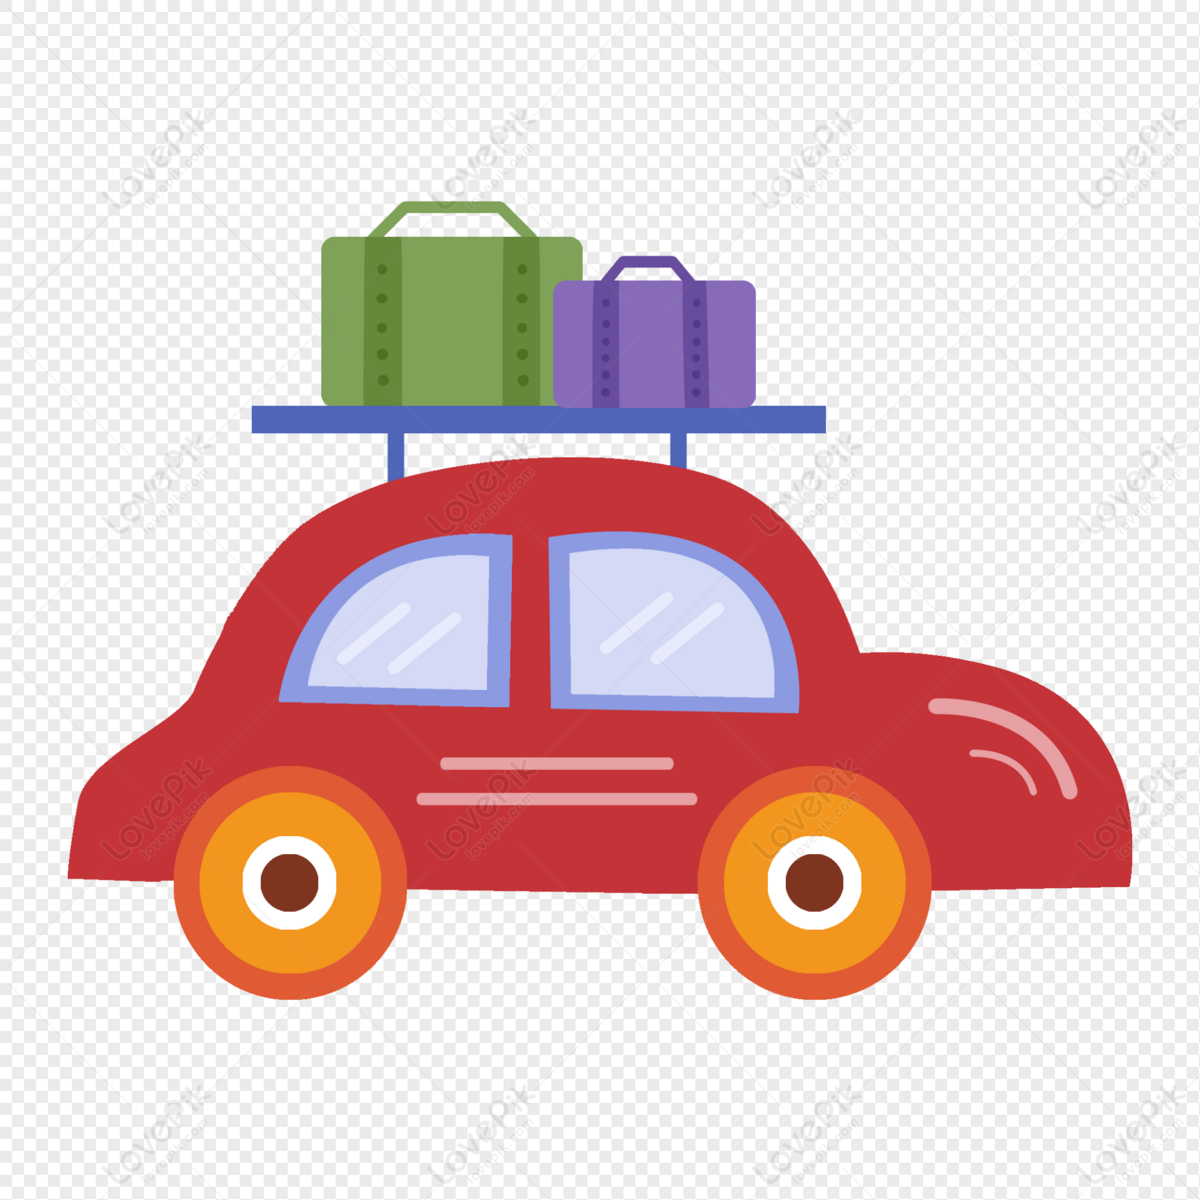 Self-driving travel car luggage, self-driving, color cars, luggage car png hd transparent image